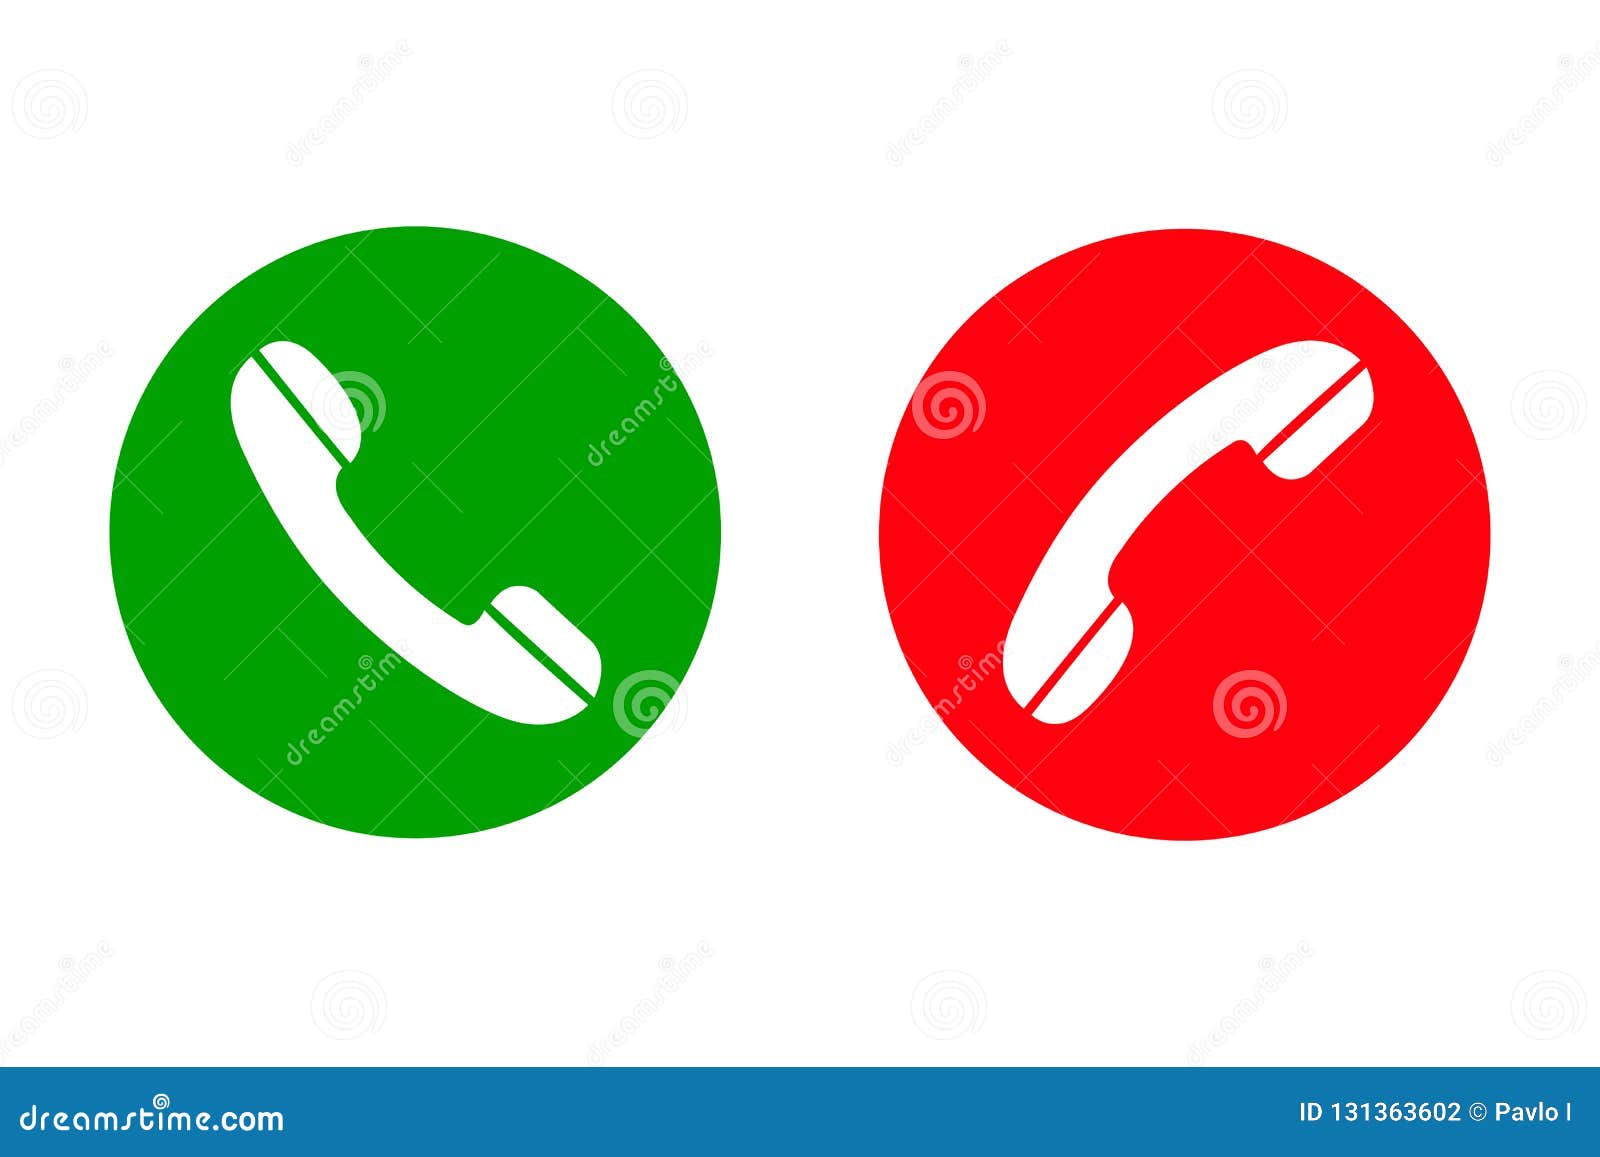 Red Phone Icon Stock Illustrations – 10,890 Phone Call Icon Stock Illustrations, Vectors & Clipart - Dreamstime